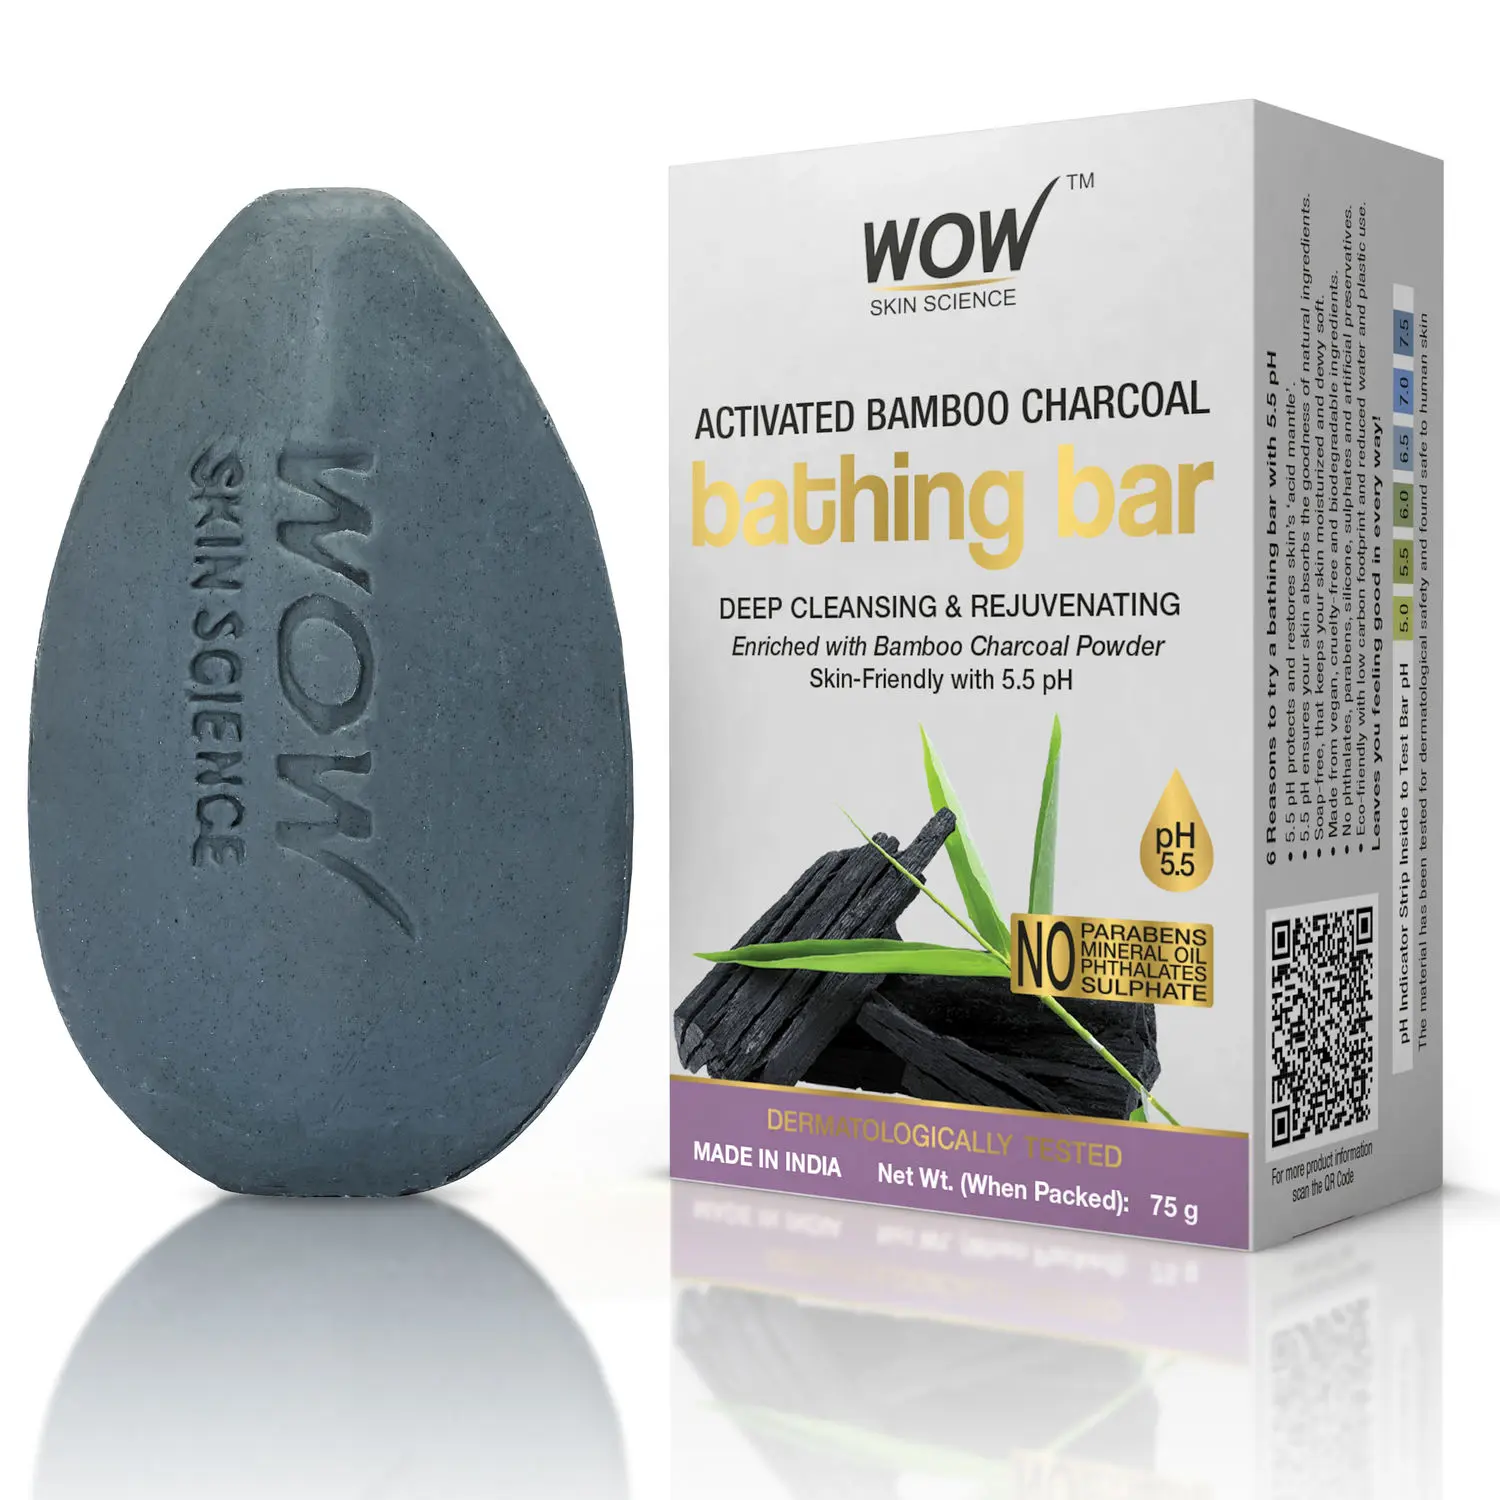 WOW Skin Science Activated Bamboo Charcoal Bathing Bar Skin-Friendly with 5.5 pH - (75 g)